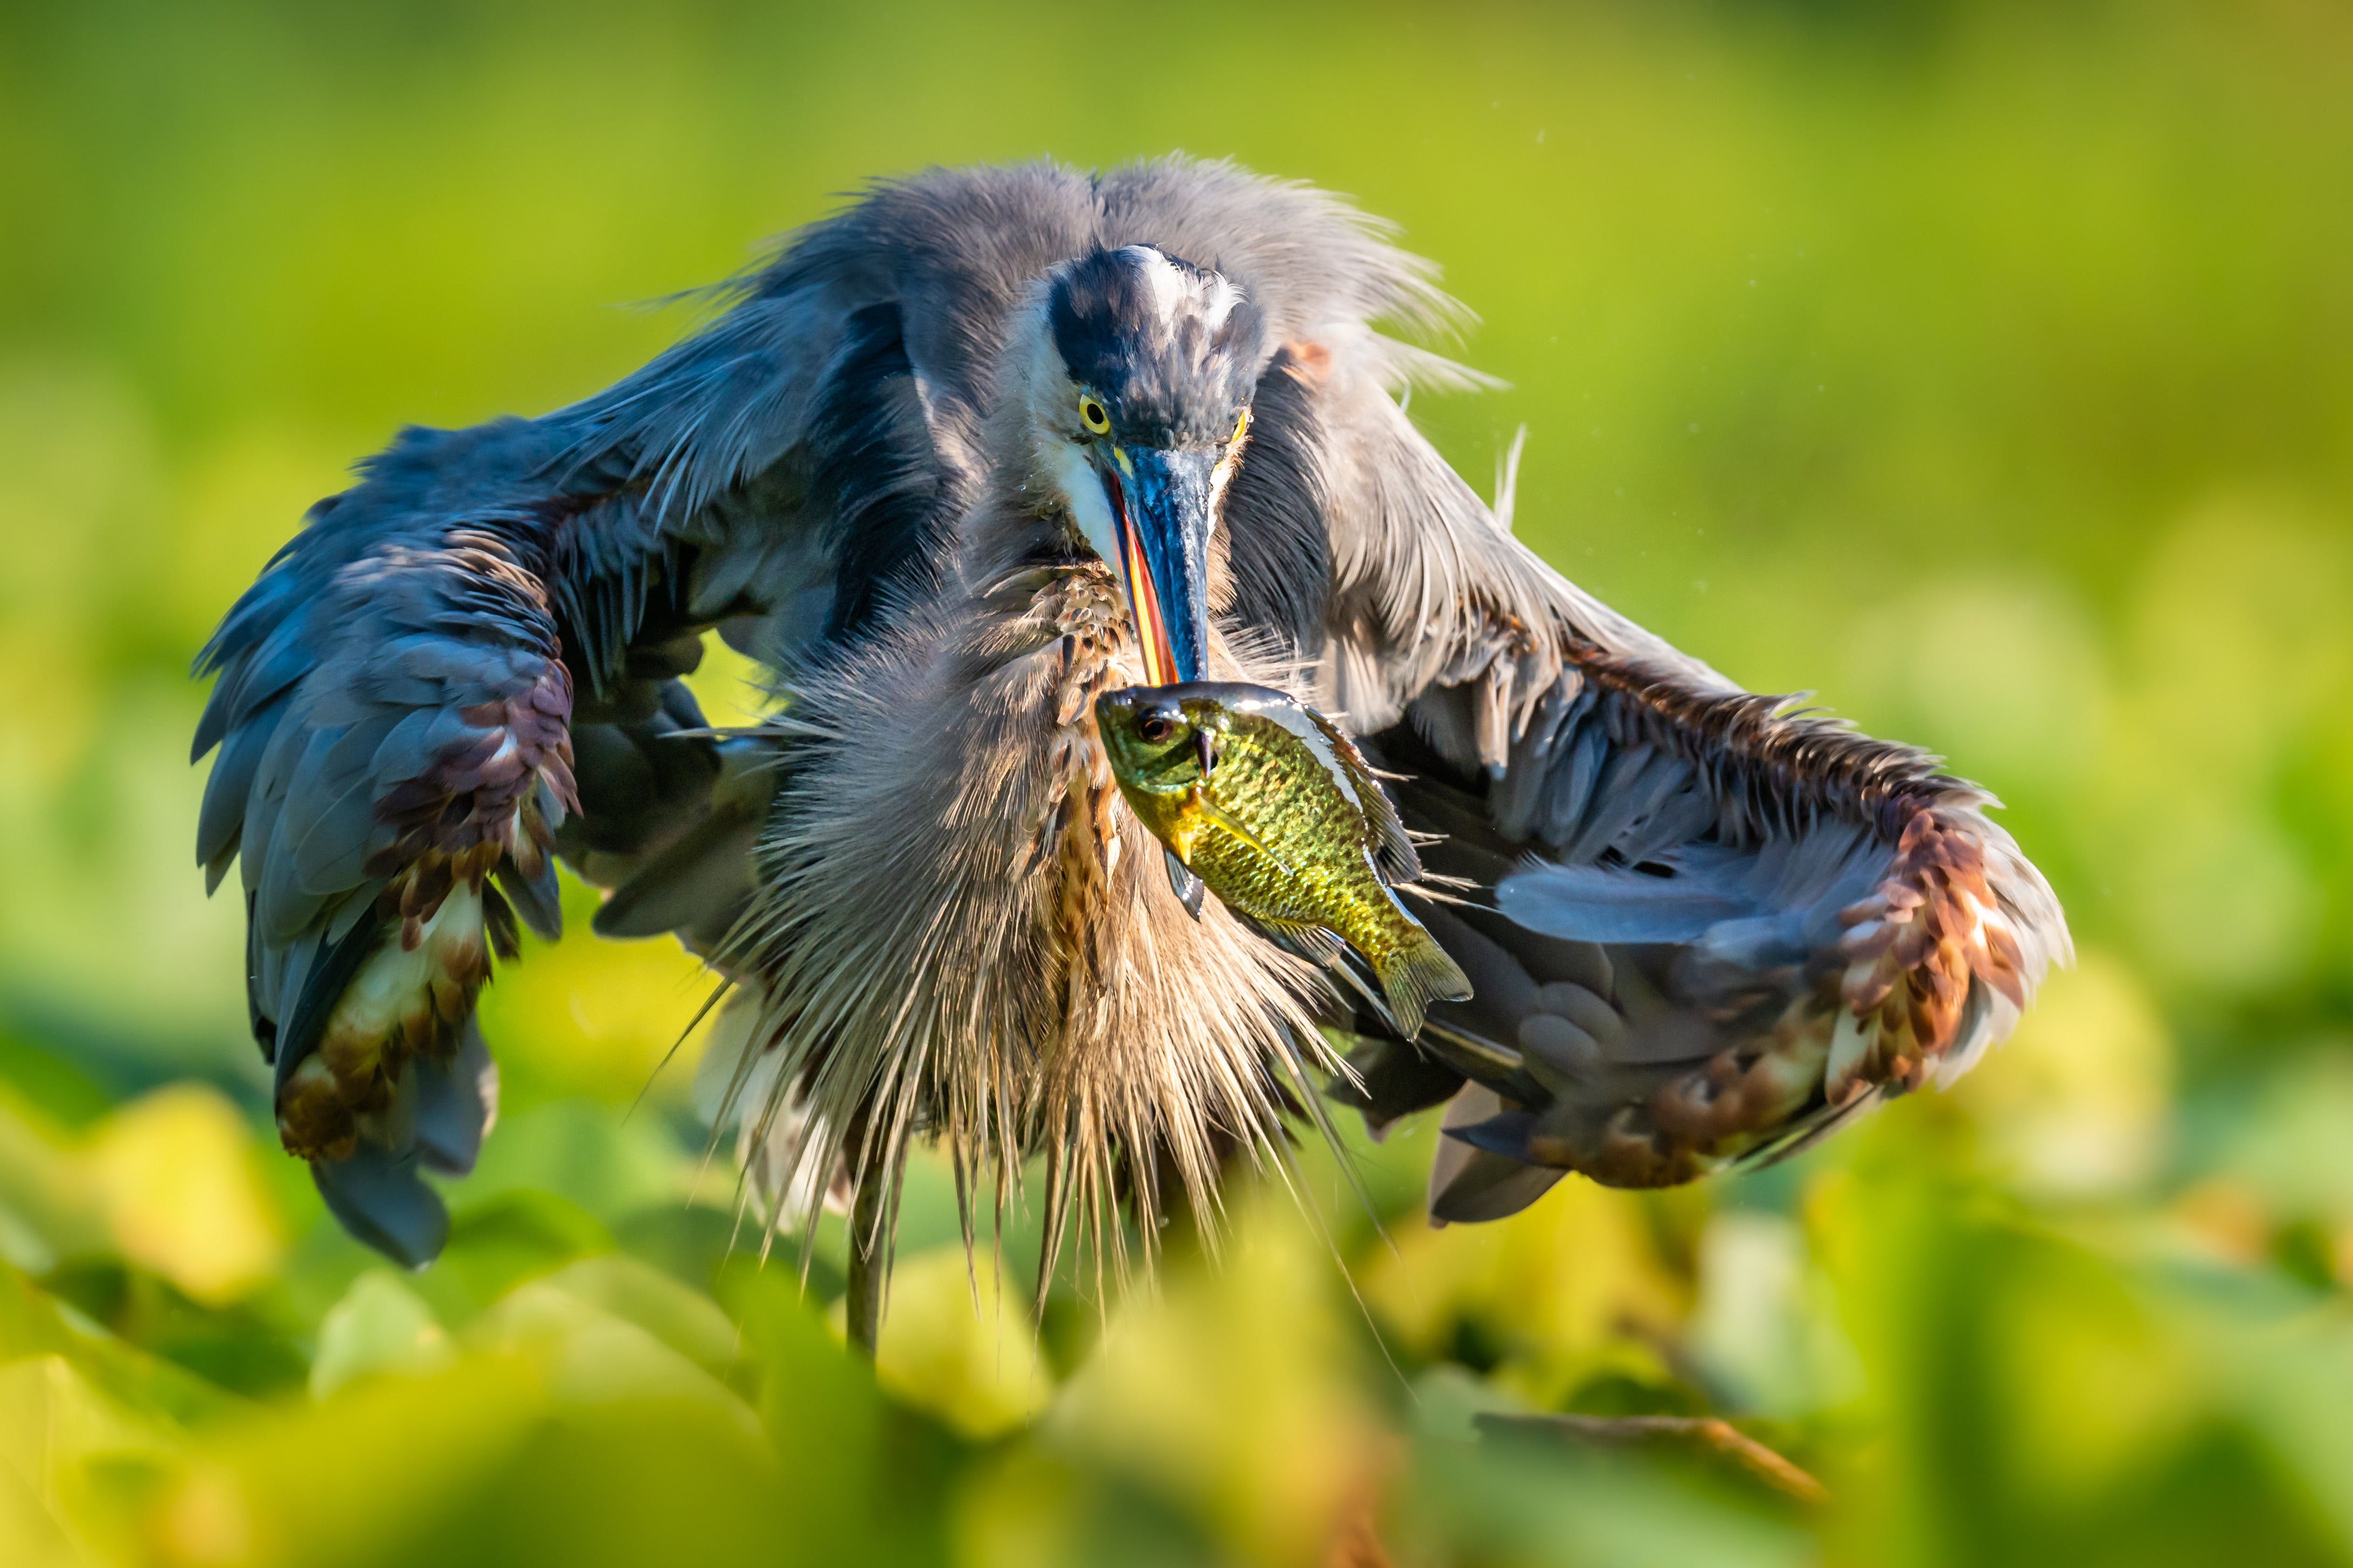 Christopher Baker took First Place in the Birds Category of the 2022 contest with his image of a Great Blue Heron in Madison, Alabama.